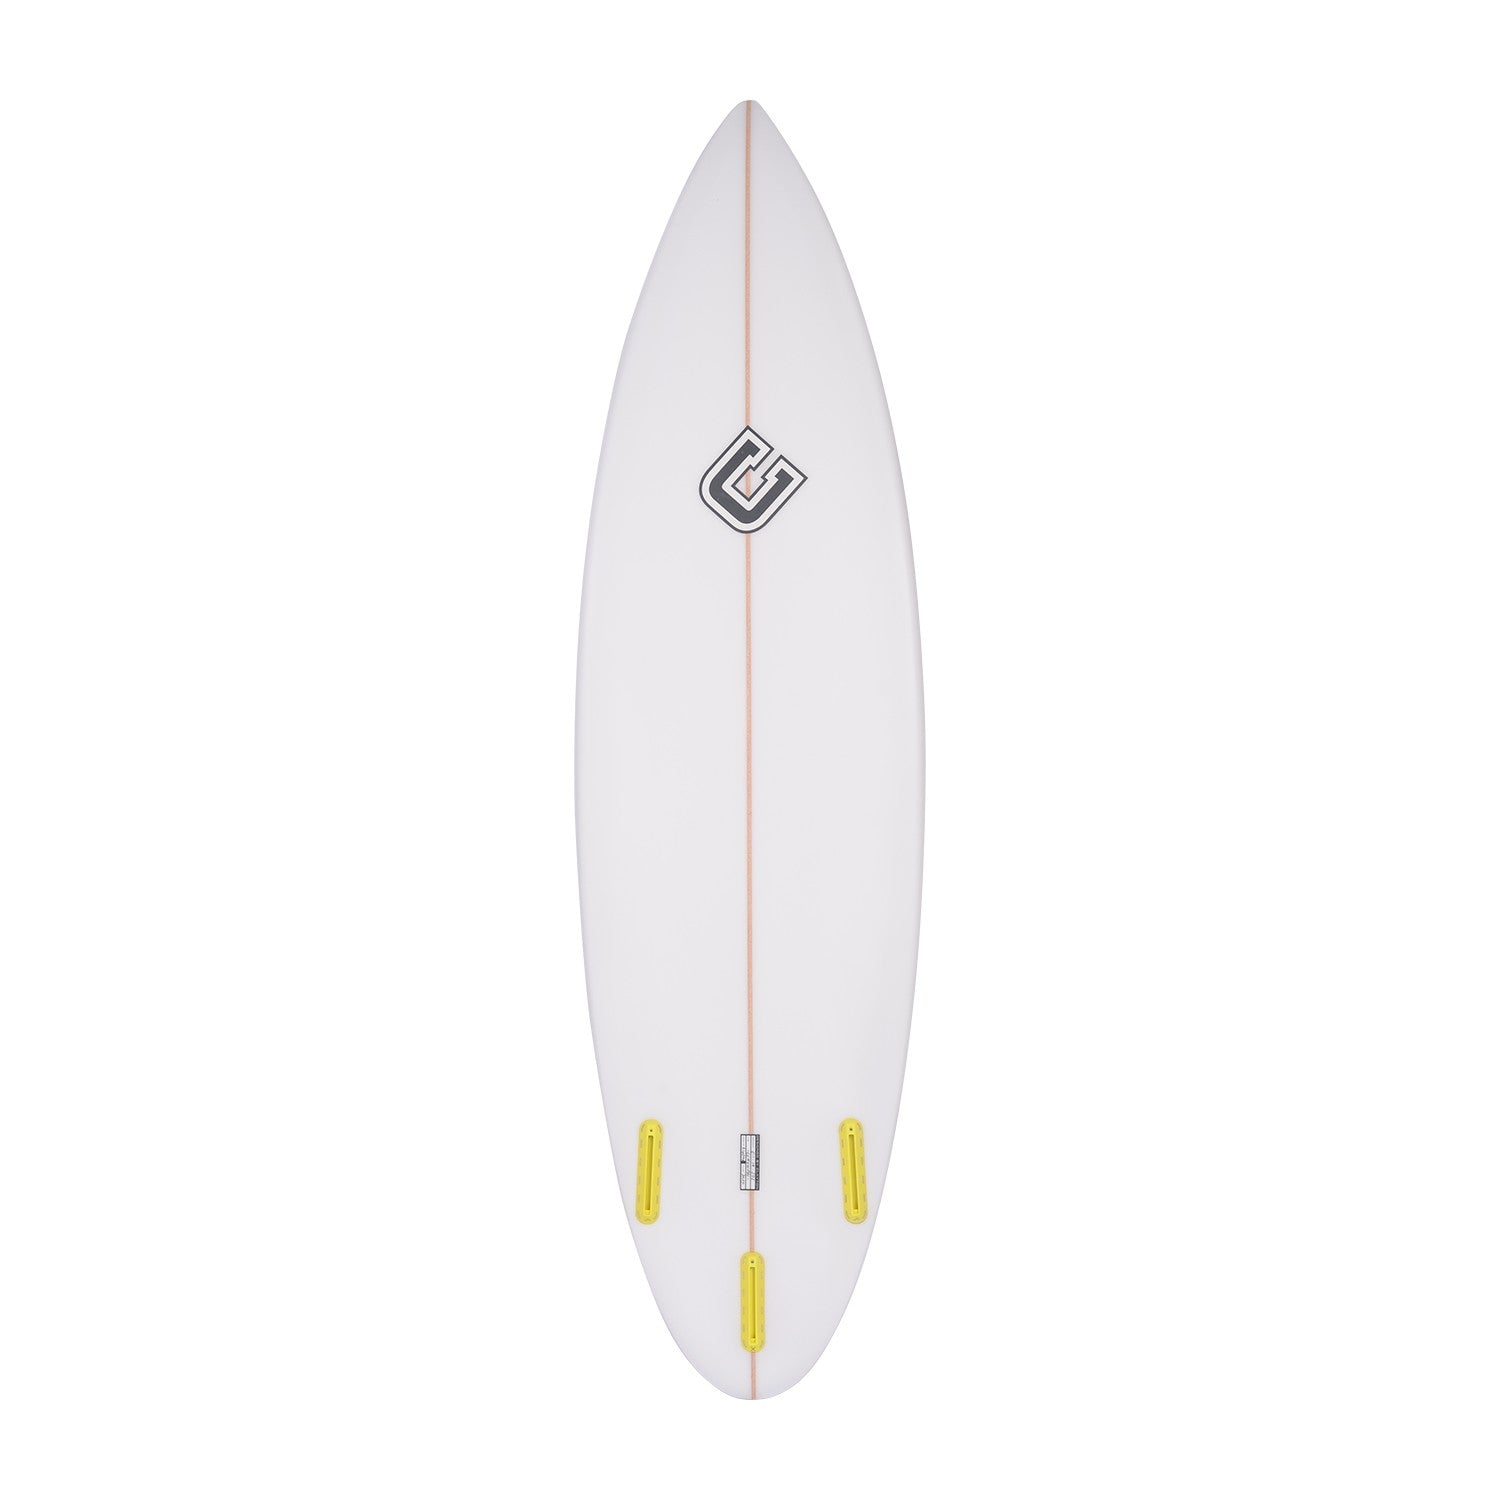 CLAYTON Surfboards - Clay10 Pro (PU) Futures - 6'1